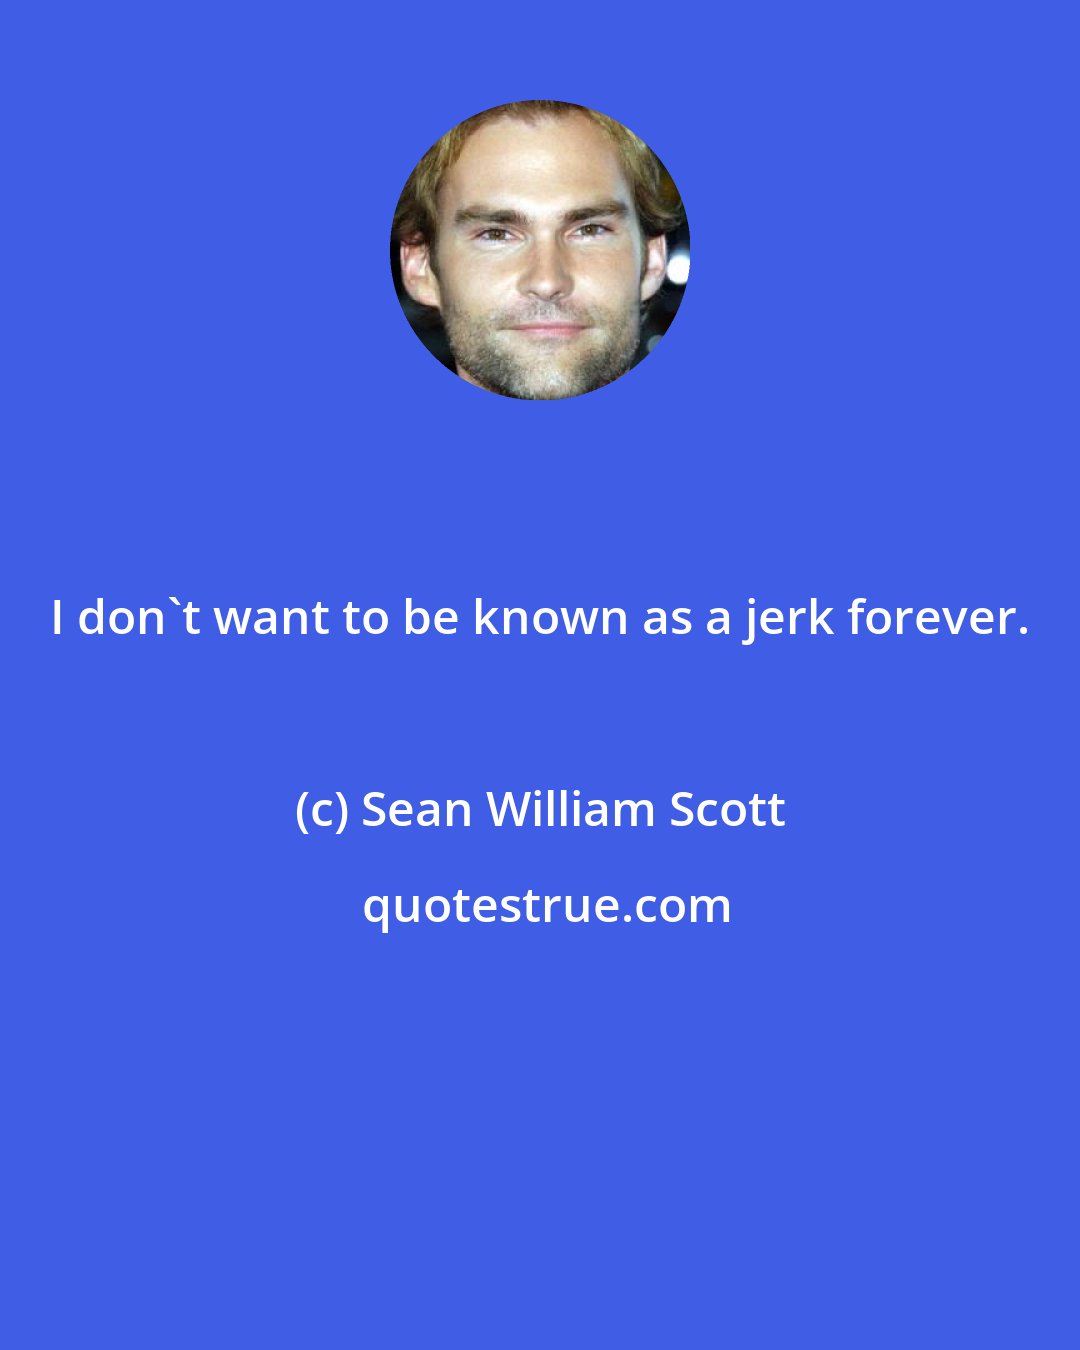 Sean William Scott: I don't want to be known as a jerk forever.